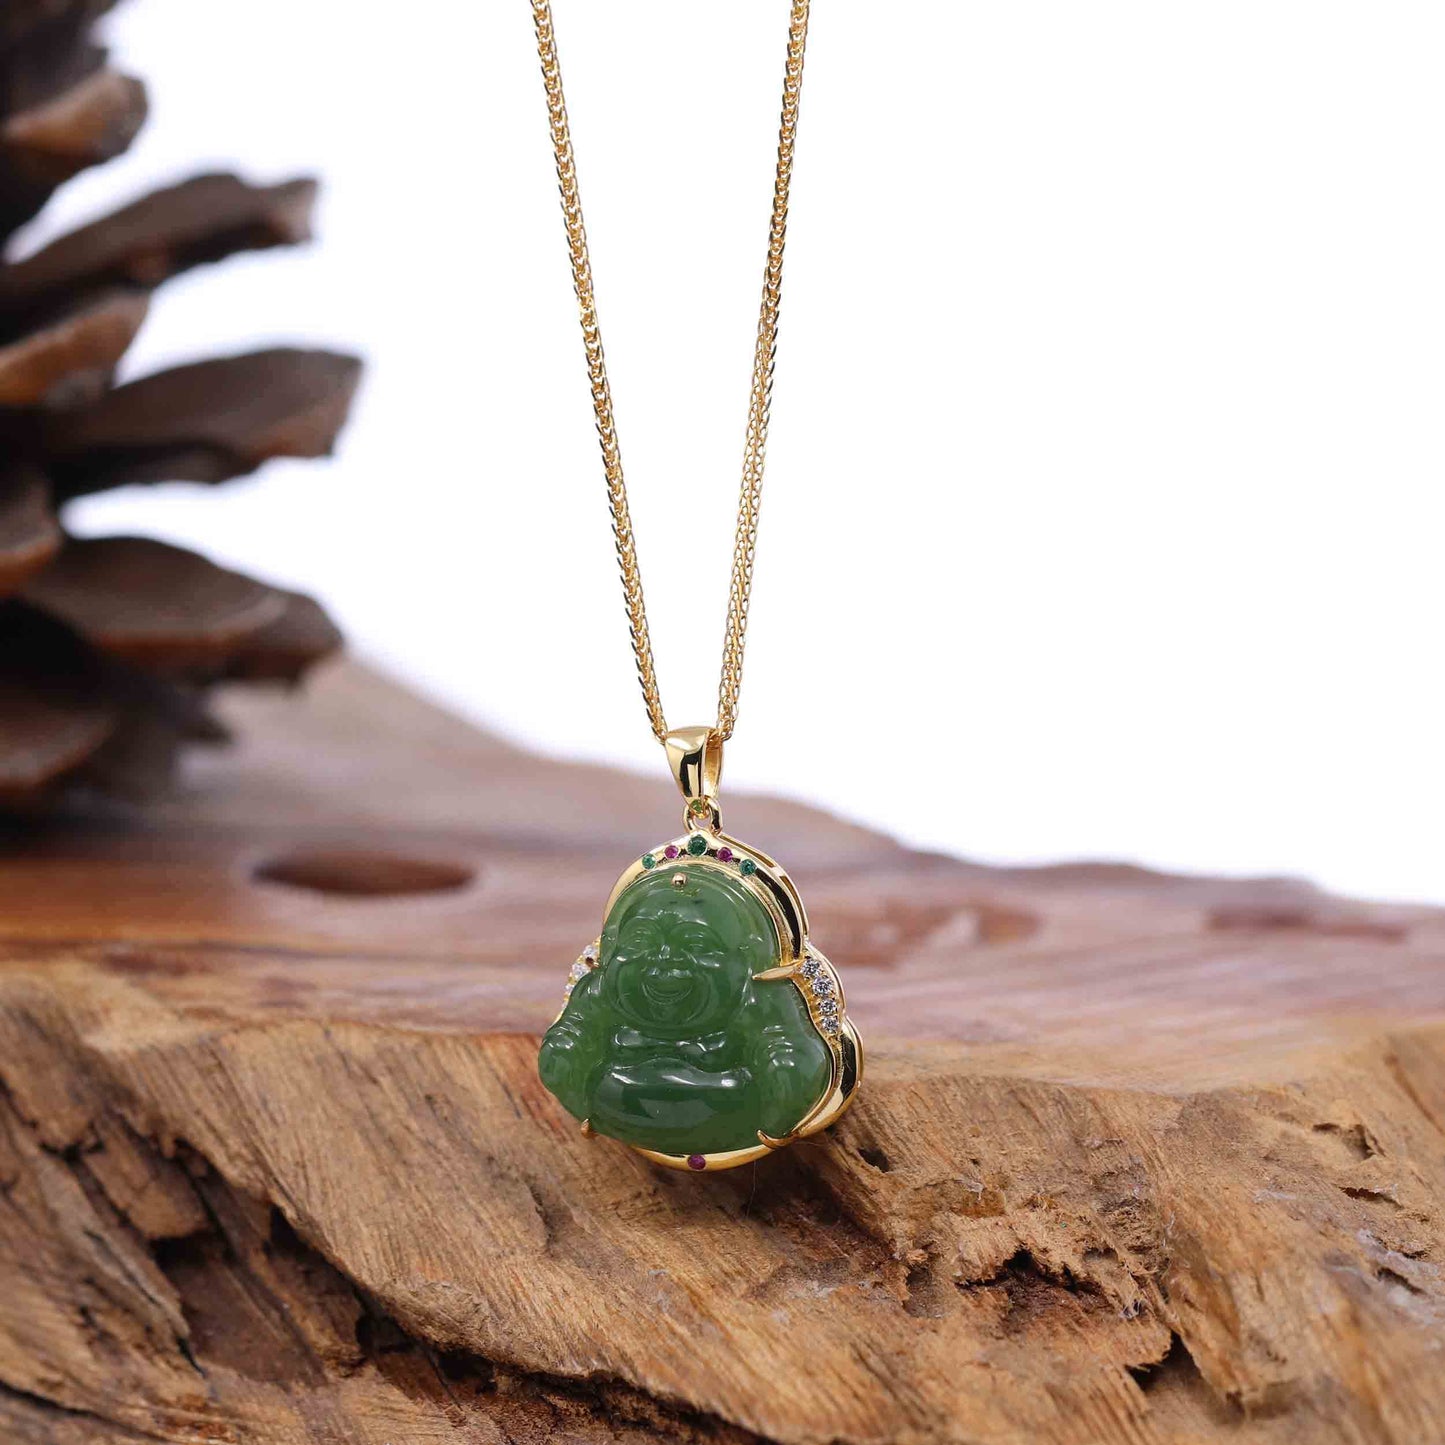 RealJade® Co. "Laughing Buddha" Gold Plated Nephrite Jade Necklace Pendant